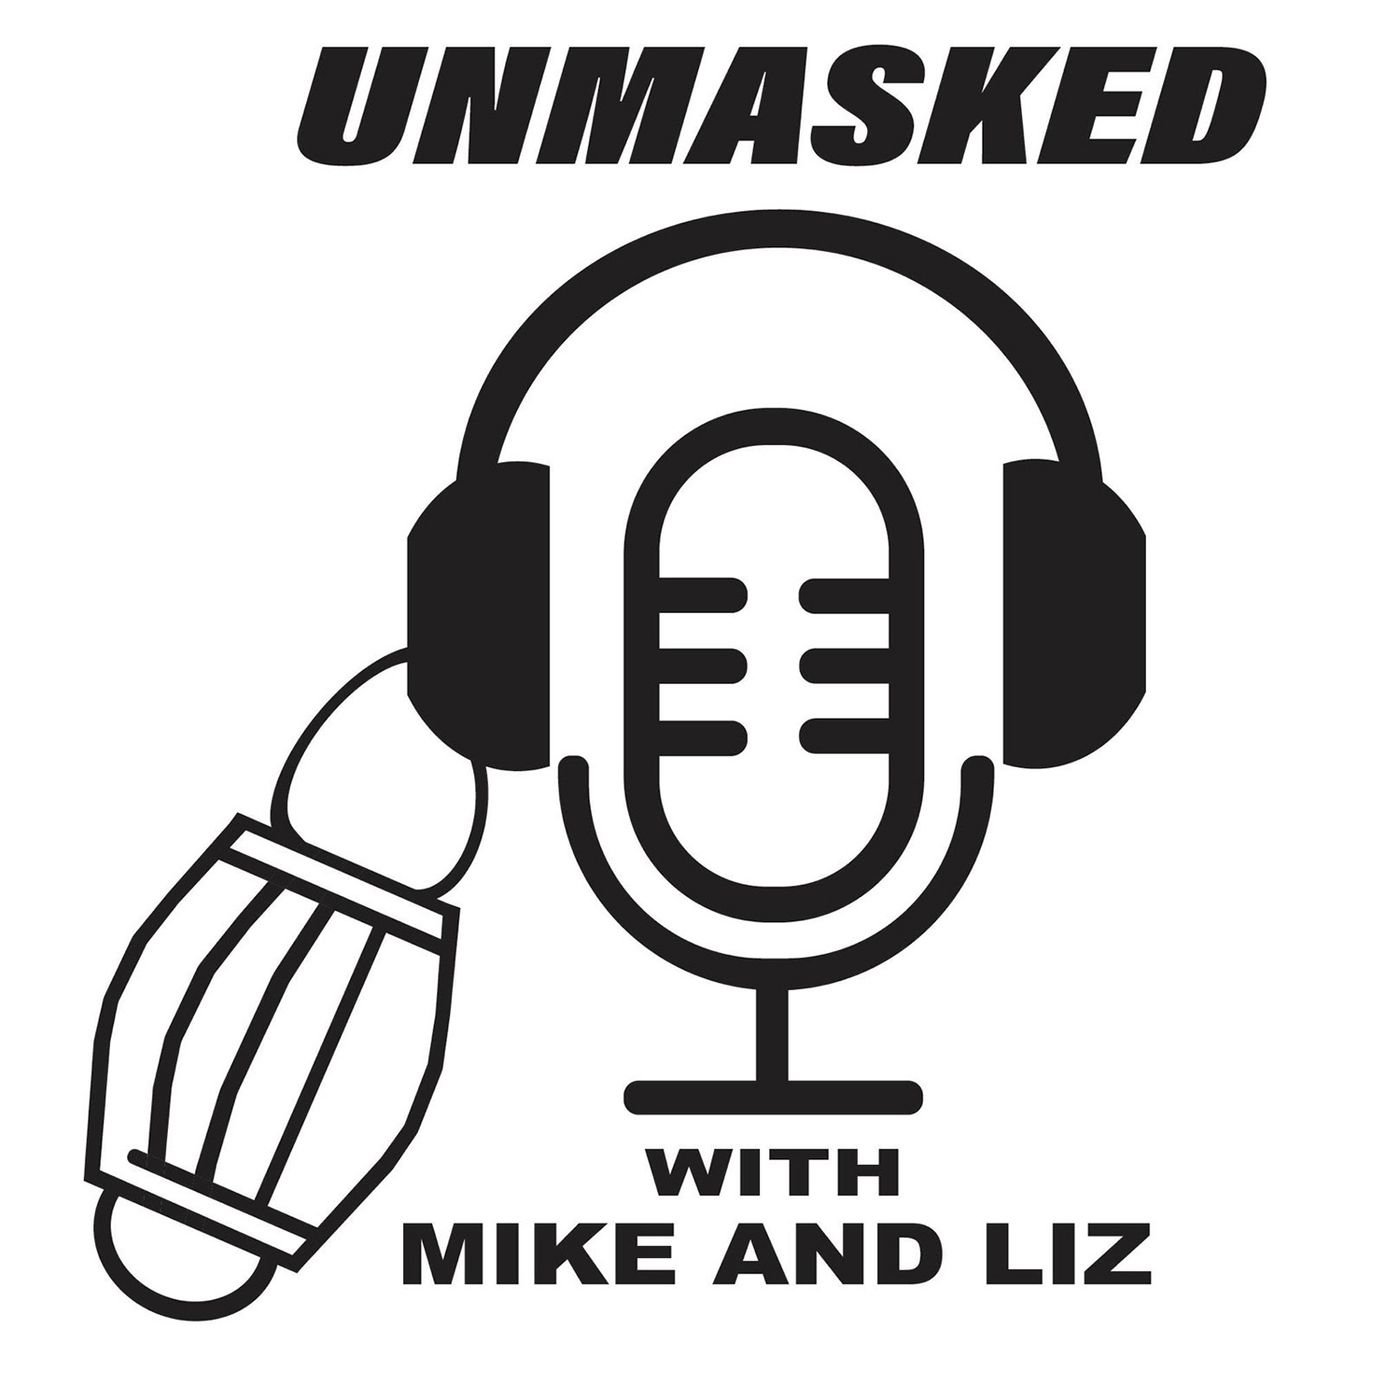 Unmasked with Mike and Friends